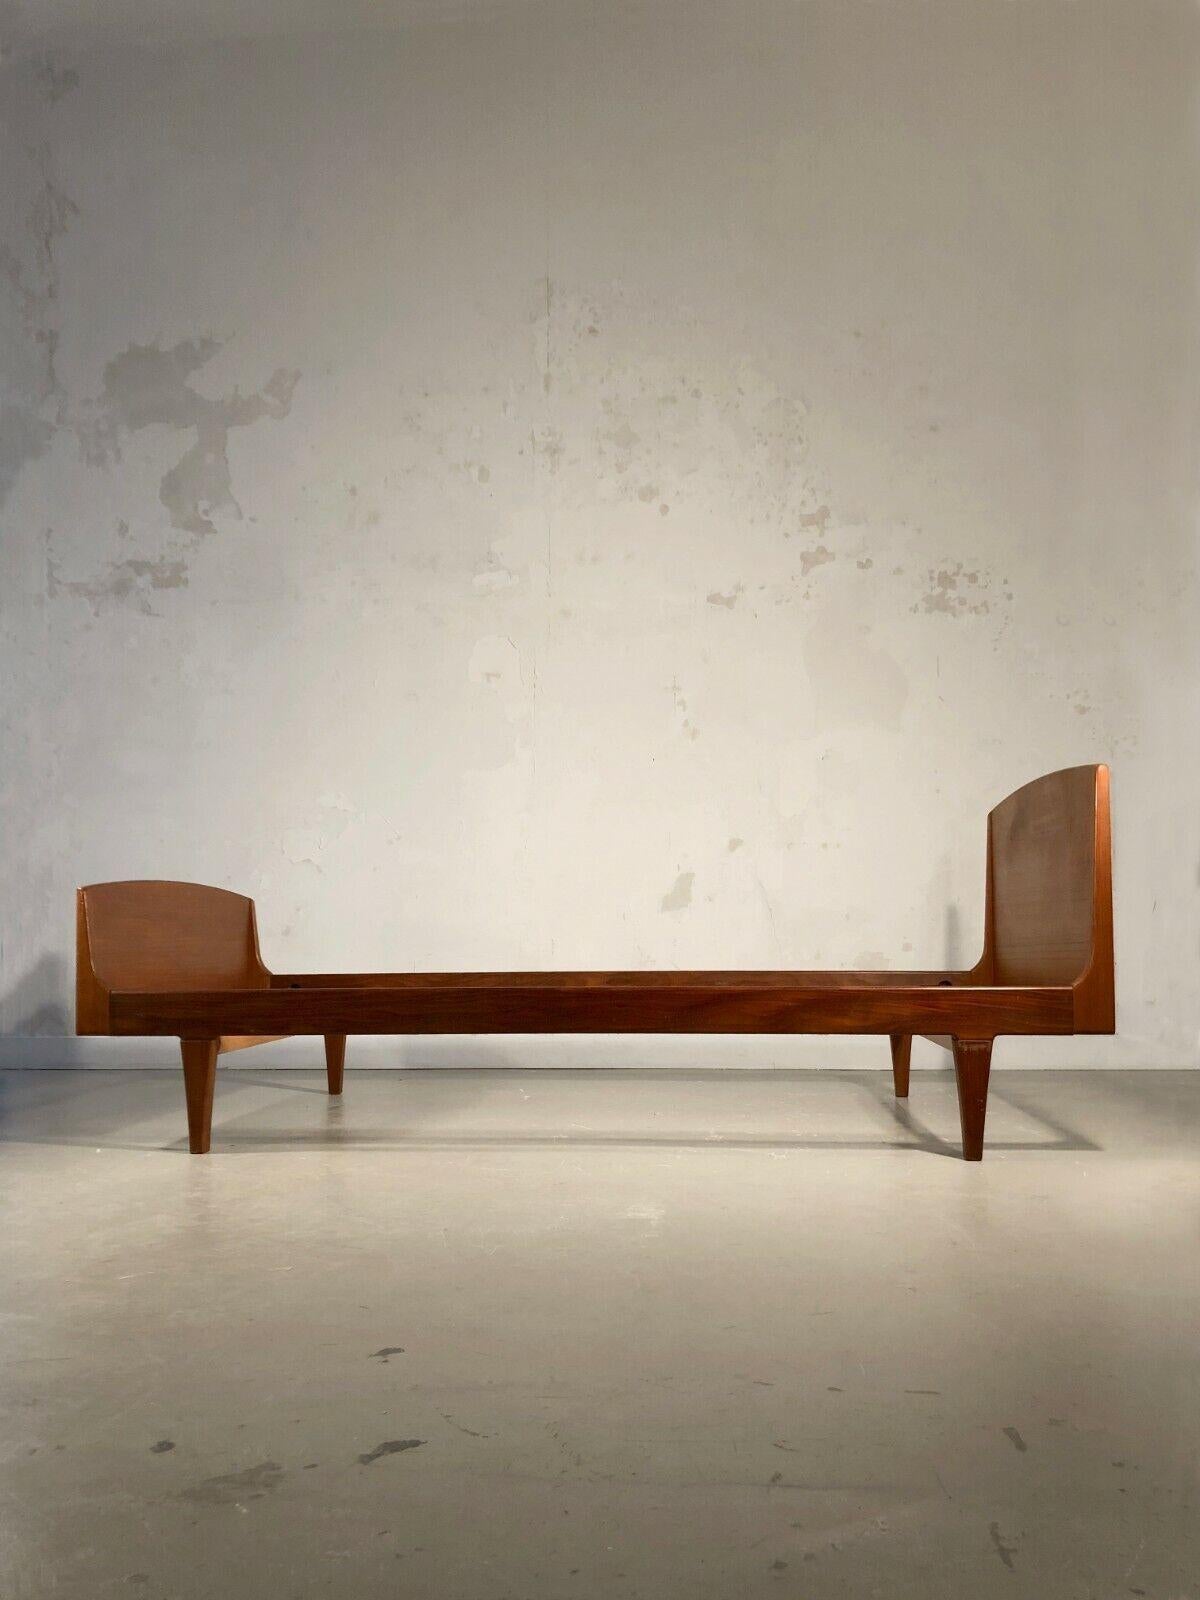 A 1-seater daybed or daybed, Modernist, Reconstruction, from Forme-Libre, Dansk, Scandinavian, from Forme-Libre, solid wood assembly with rounded lines, attributed to Roger Landault, France 1950.
In the spirit of J.A. Motte, René Caillette, etc...